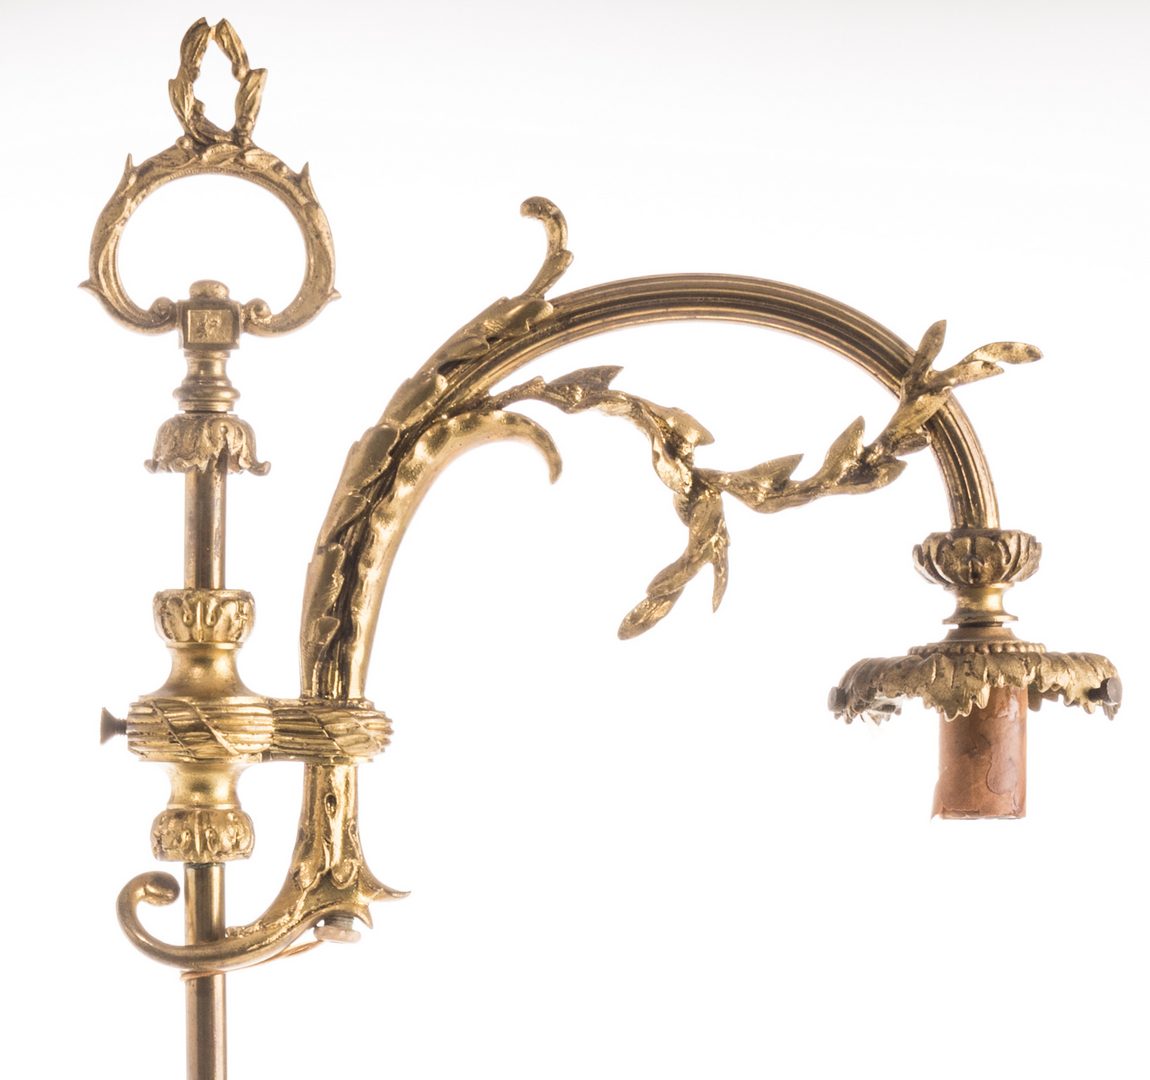 Lot 724: French Neoclassical Bronze Lamp